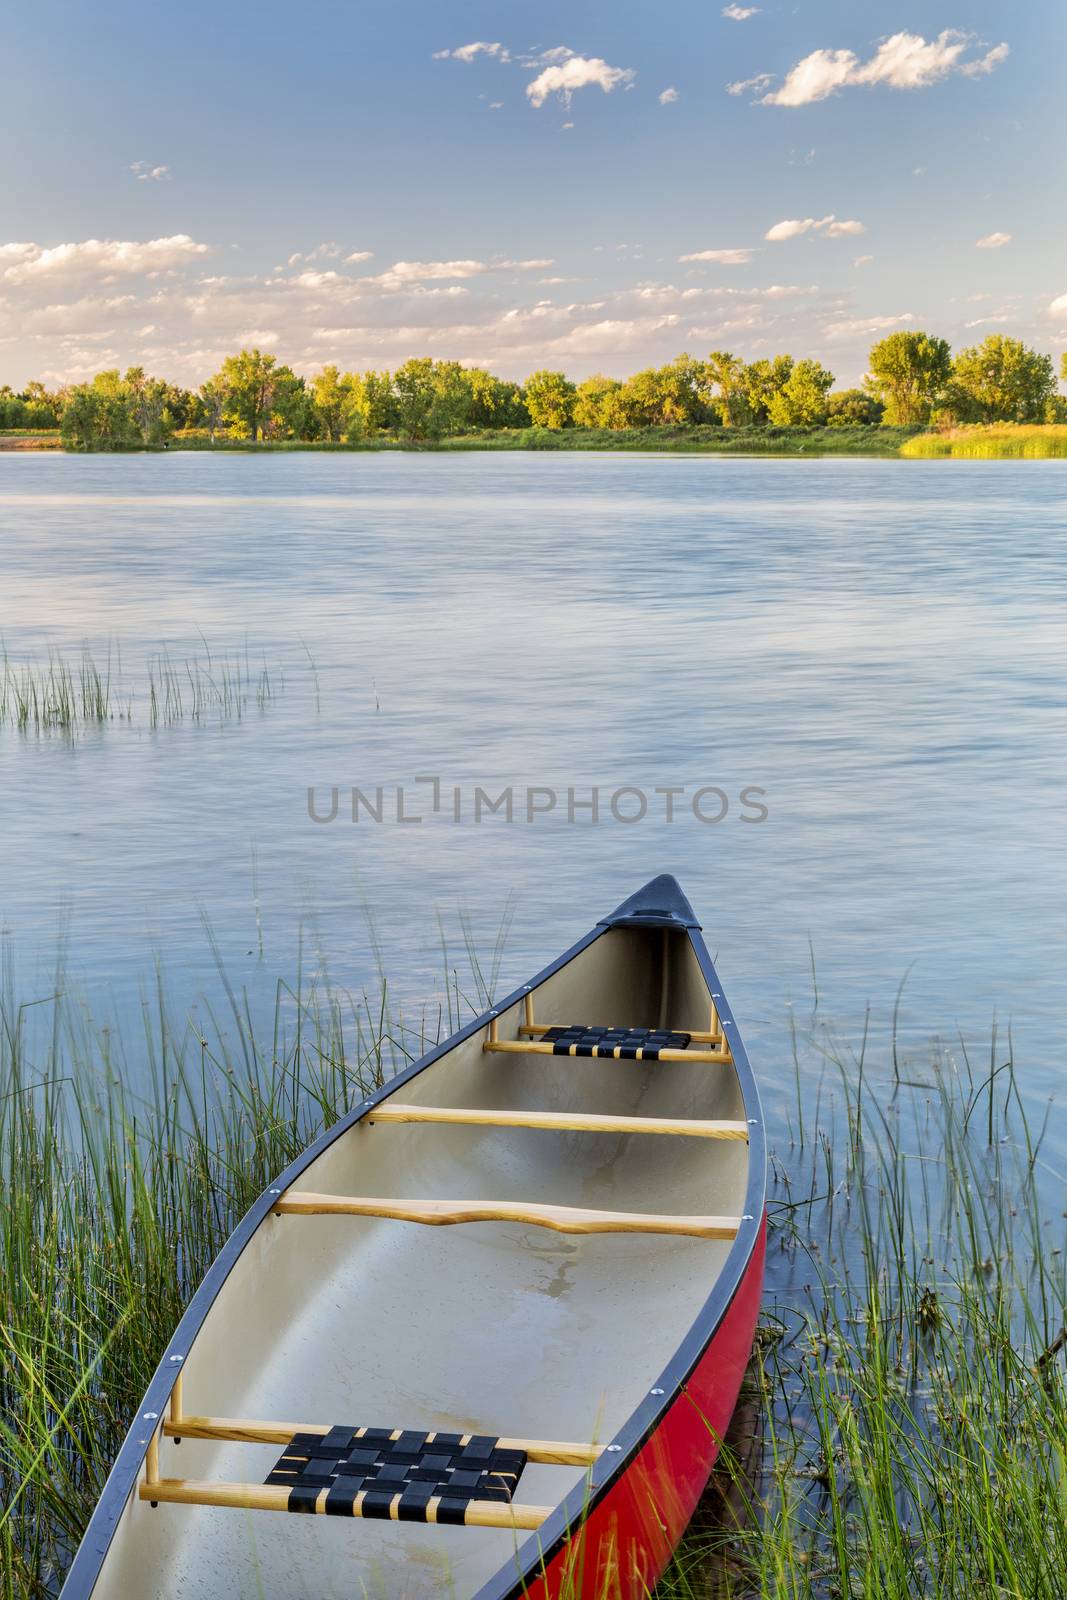 red canoe on lake ready for paddling by PixelsAway